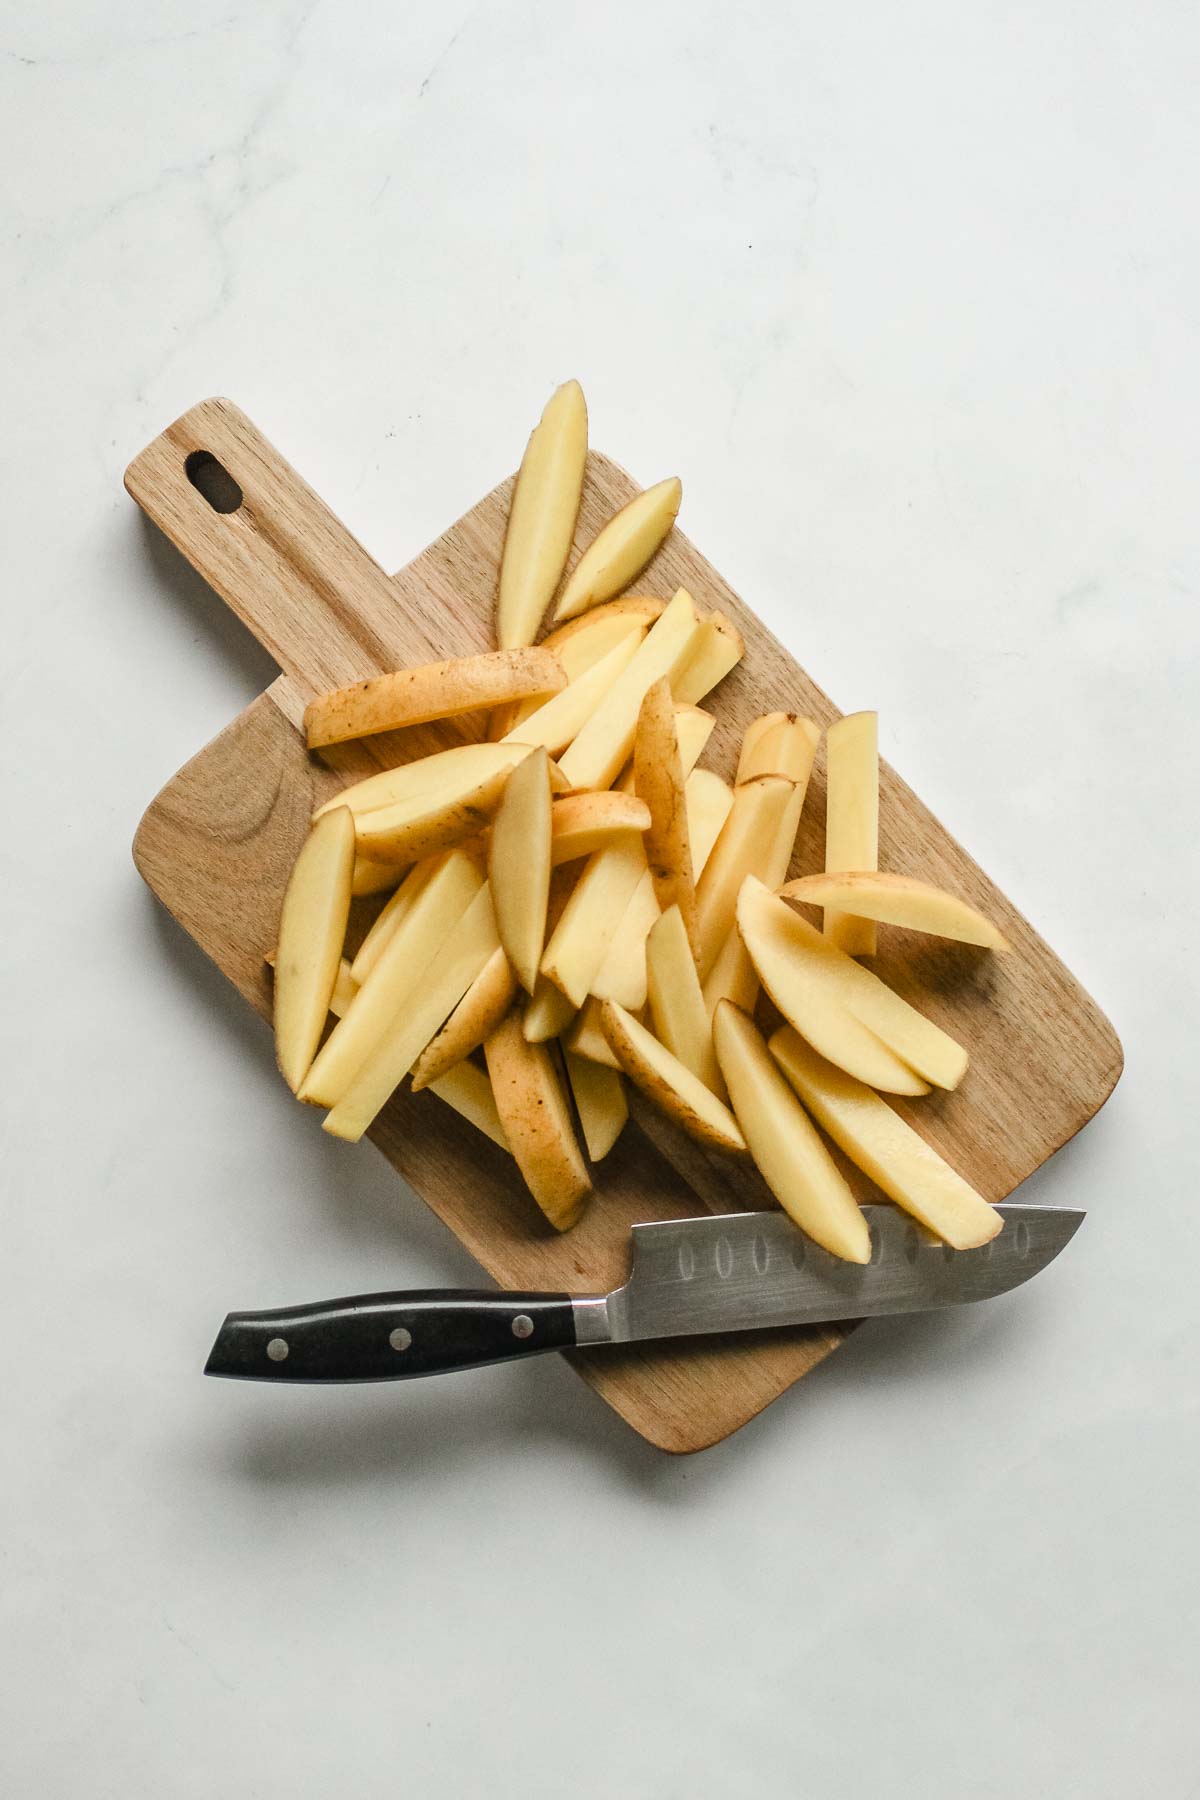 potatoes with skin cut into fries on wooden board with knife.